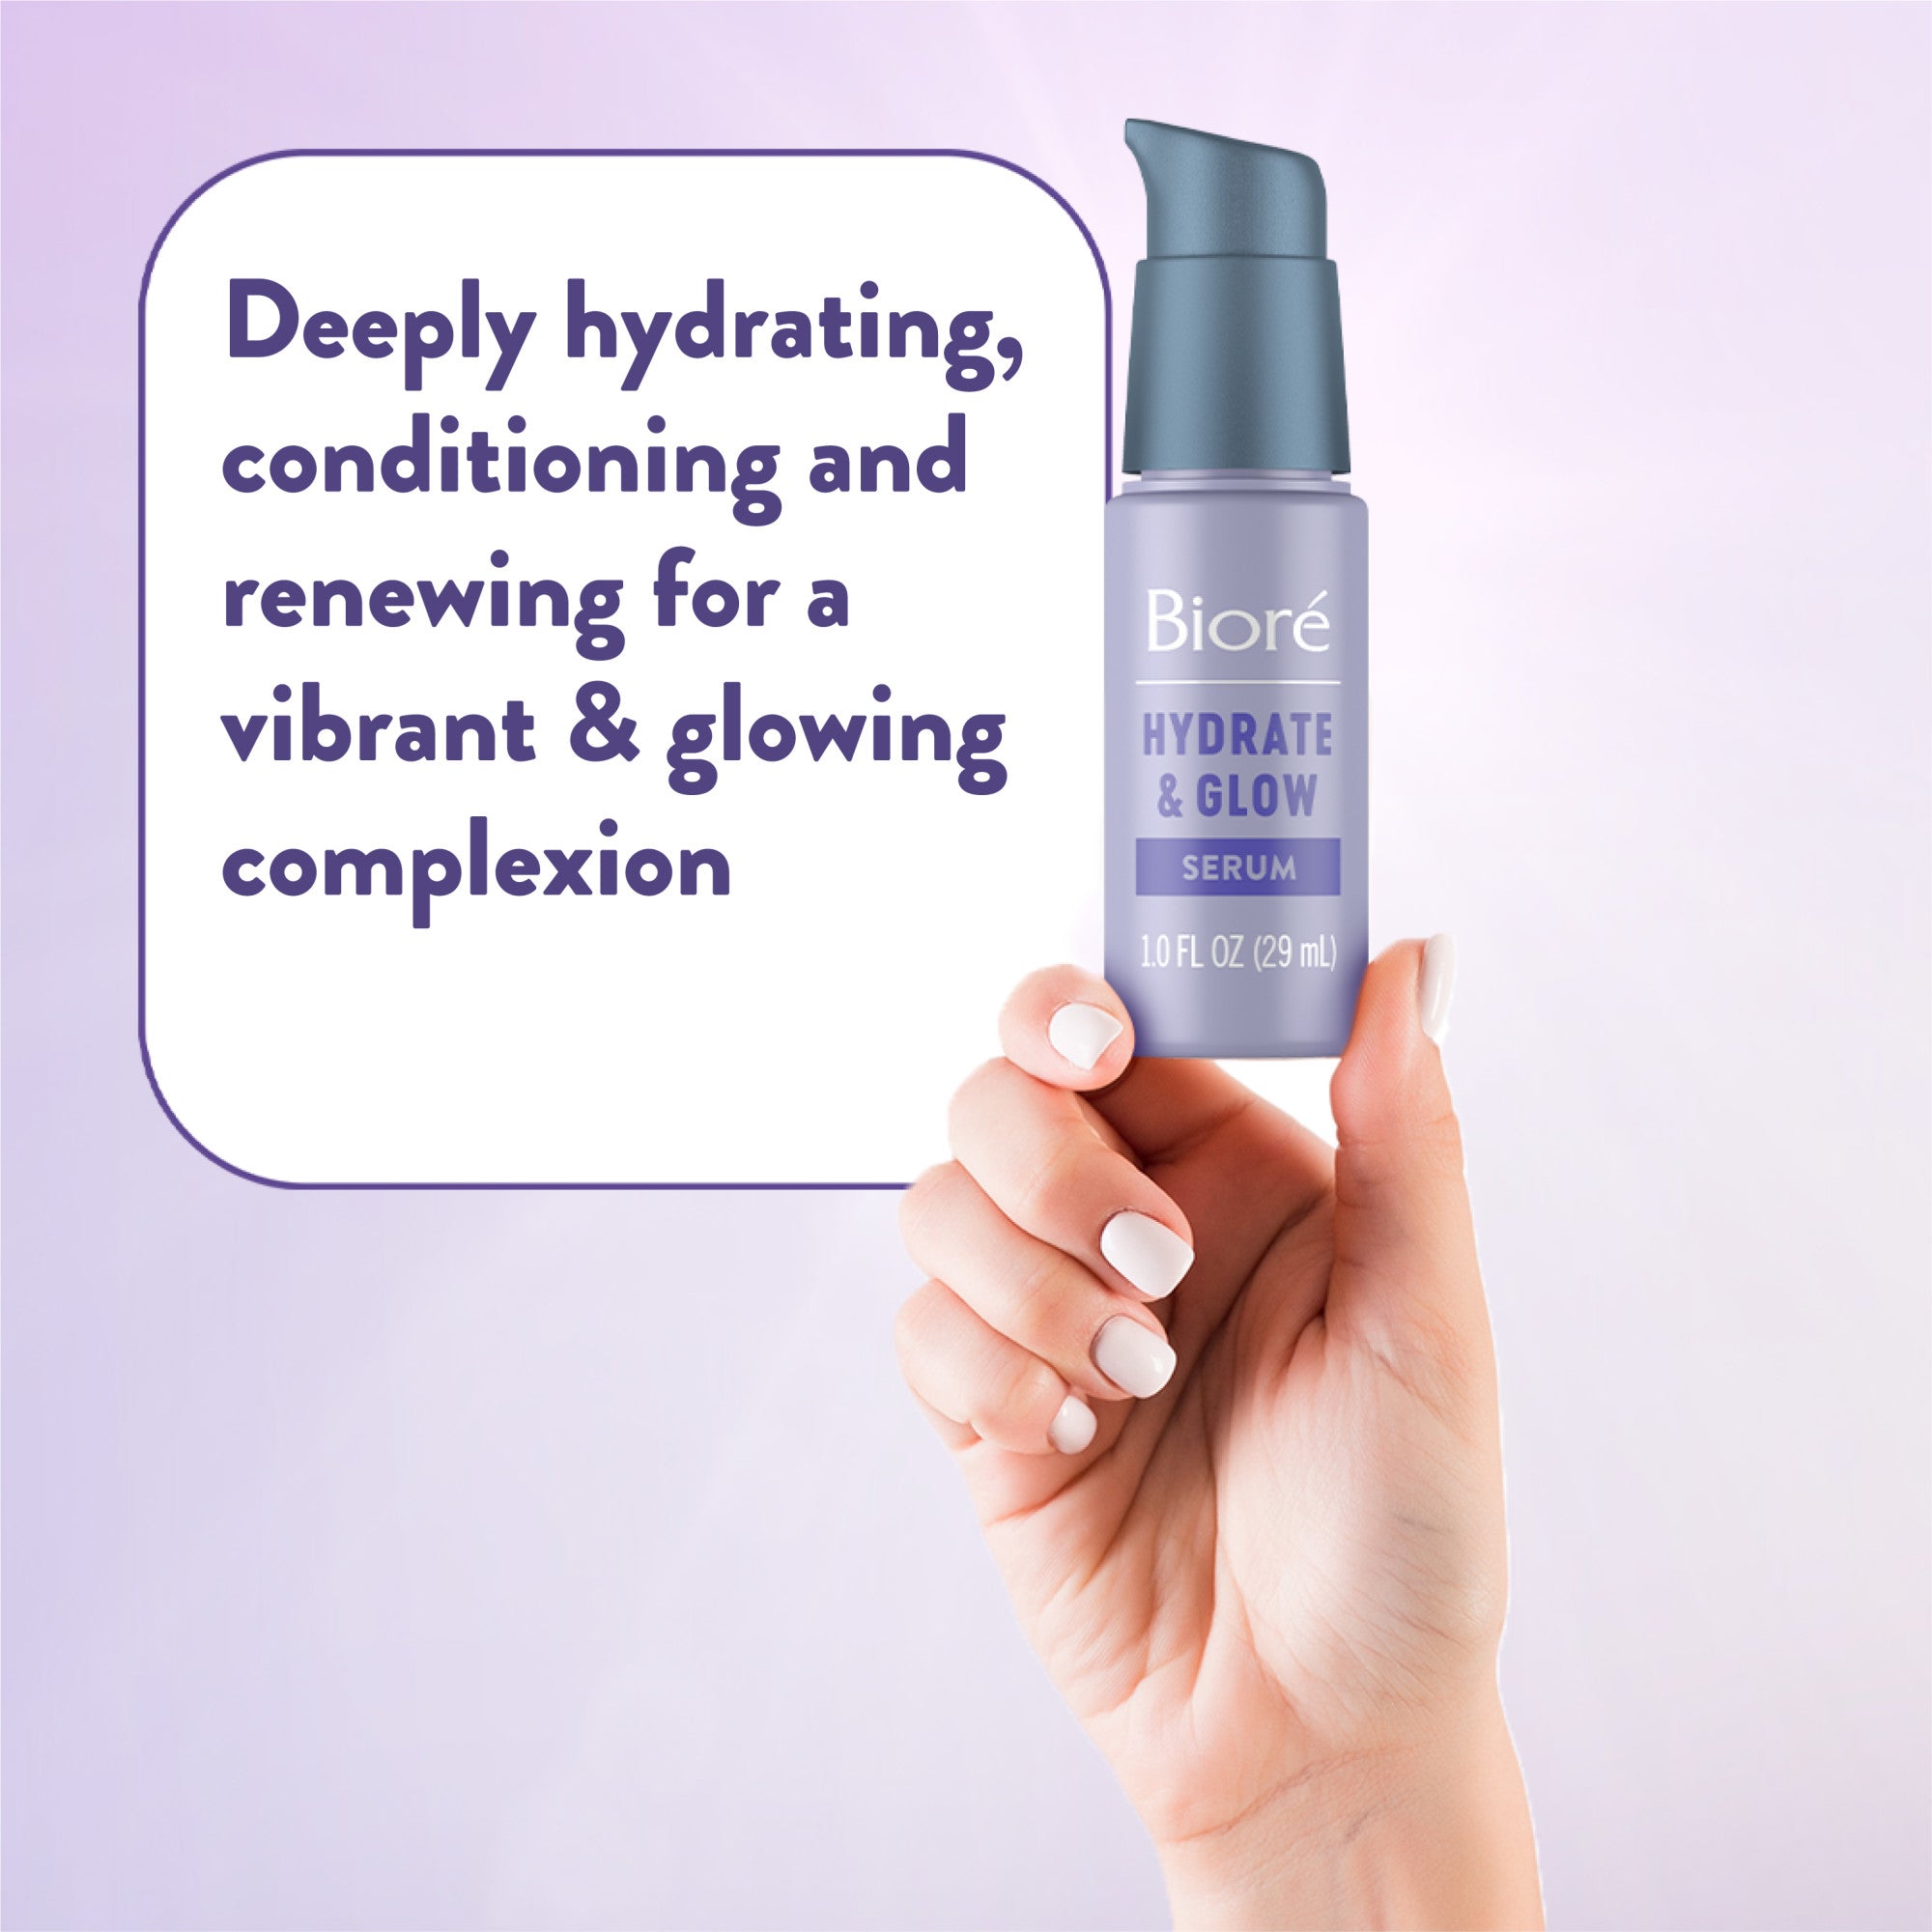 Deeply hydrating, conditioning and renewing for a vibrant and glowing complexion.